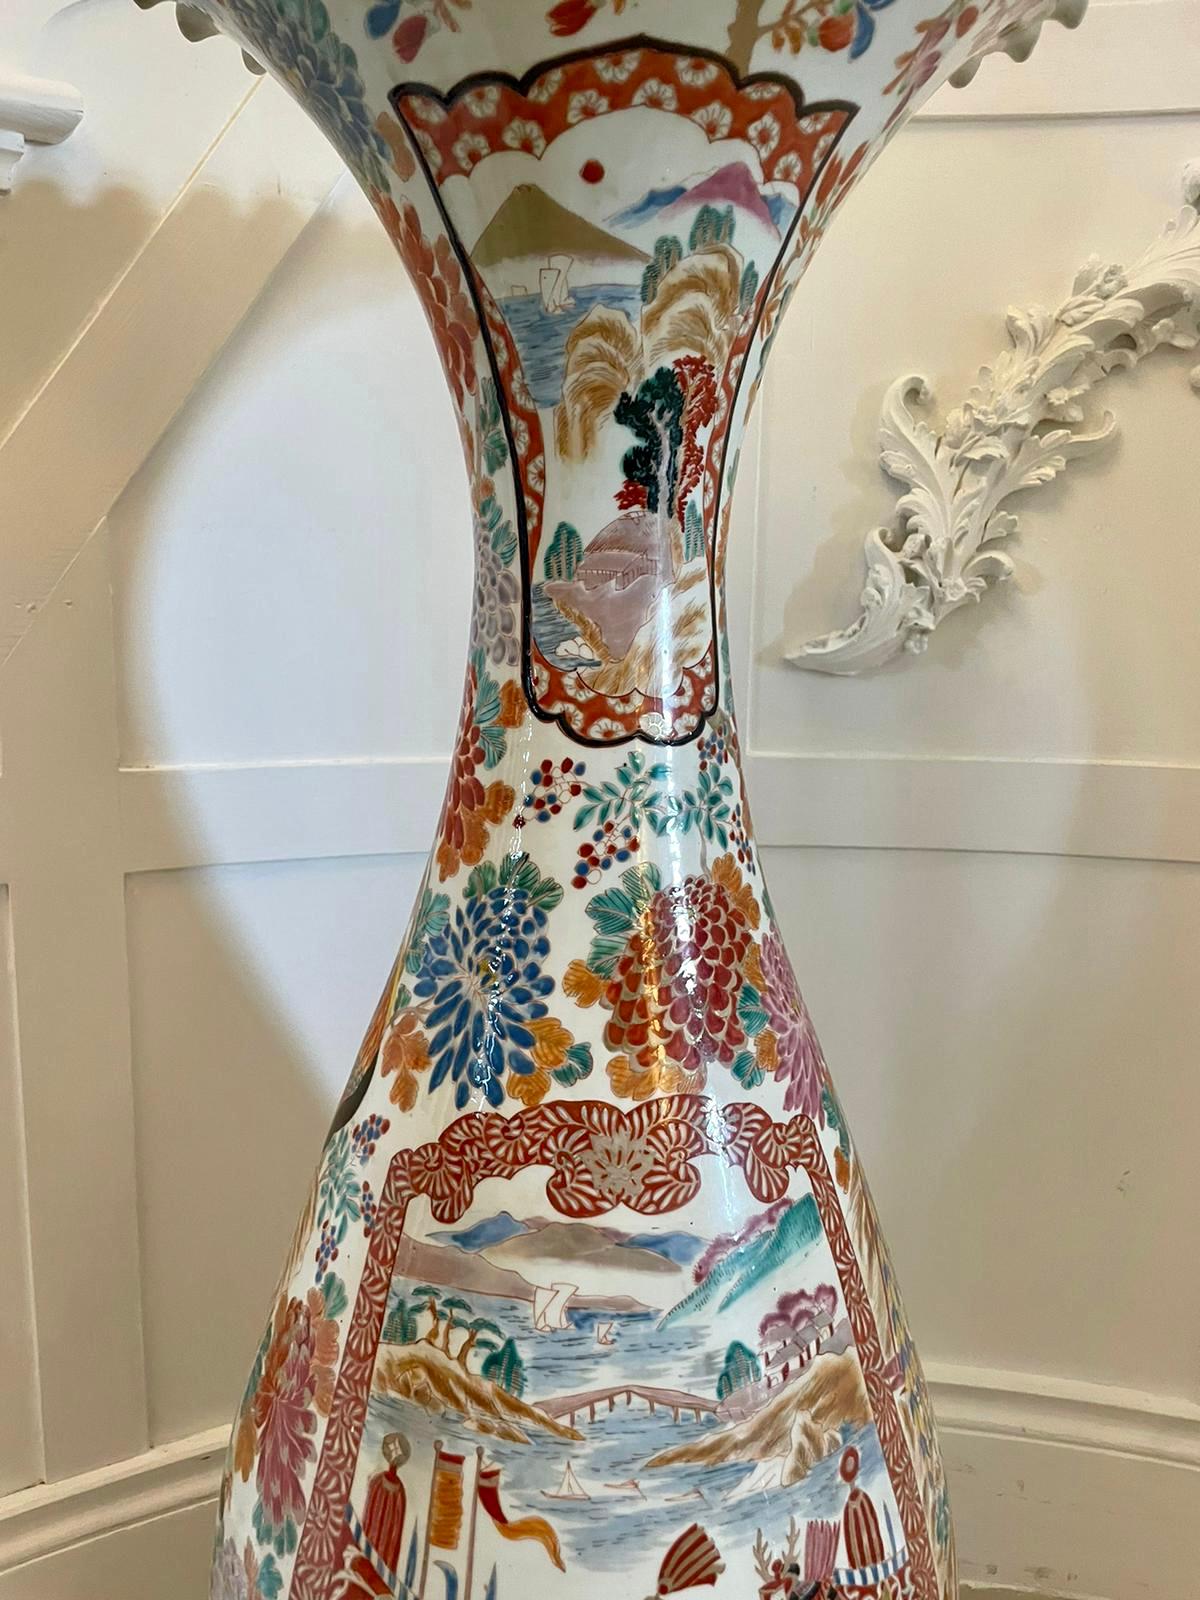 Large antique 19th century quality Japanese Imari floor standing vase having a splendid trumpet shaped scalloped edge top, fantastic hand painted panels with Japanese people in period clothing, trees, houses, birds, deer’s, dogs of goo and